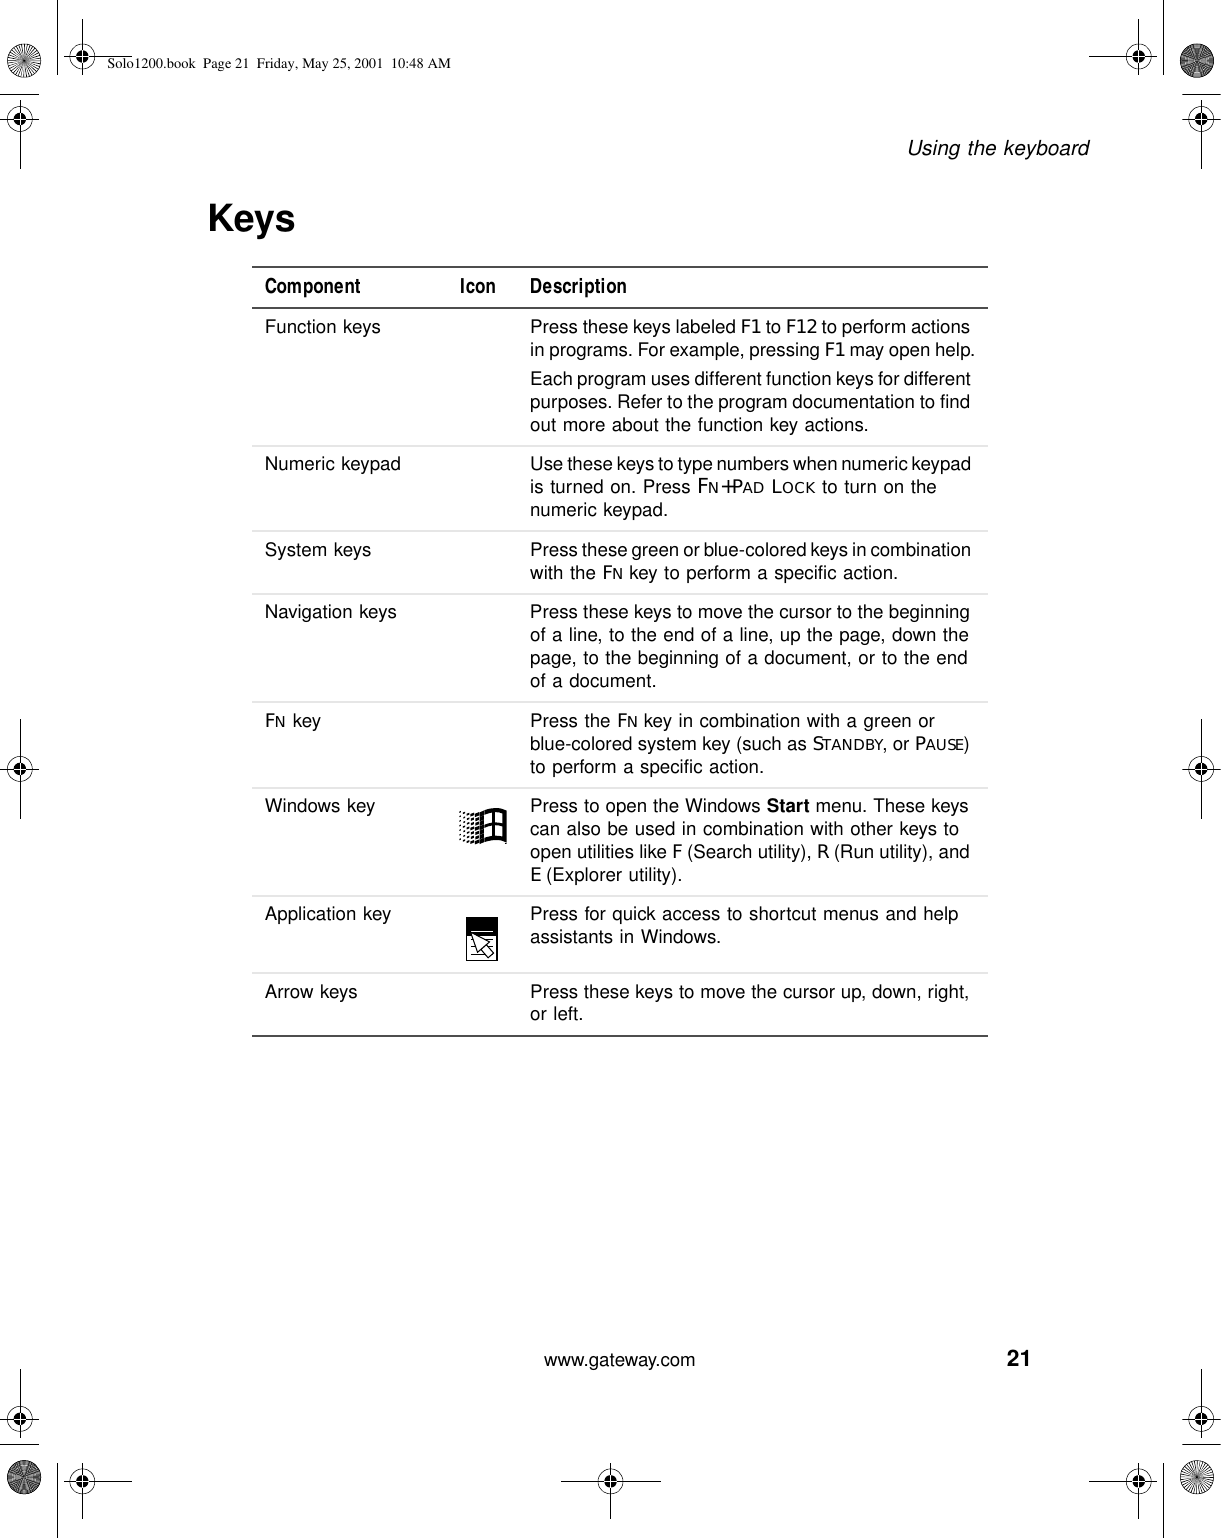 21Using the keyboardwww.gateway.comKeysComponent Icon DescriptionFunction keys Press these keys labeled F1 to F12 to perform actions in programs. For example, pressing F1 may open help.Each program uses different function keys for different purposes. Refer to the program documentation to find out more about the function key actions. Numeric keypad Use these keys to type numbers when numeric keypad is turned on. Press FN+PAD LOCK to turn on the numeric keypad.System keys Press these green or blue-colored keys in combination with the FNkey to perform a specific action.Navigation keys Press these keys to move the cursor to the beginning of a line, to the end of a line, up the page, down the page, to the beginning of a document, or to the end of a document.FN key Press the FNkey in combination with a green or blue-colored system key (such as STANDBY, or PAUSE) to perform a specific action.Windows key Press to open the Windows Start menu. These keys can also be used in combination with other keys to open utilities like F(Search utility), R(Run utility), and E(Explorer utility).Application key Press for quick access to shortcut menus and help assistants in Windows.Arrow keys Press these keys to move the cursor up, down, right, or left.Solo1200.book Page 21 Friday, May 25, 2001 10:48 AM